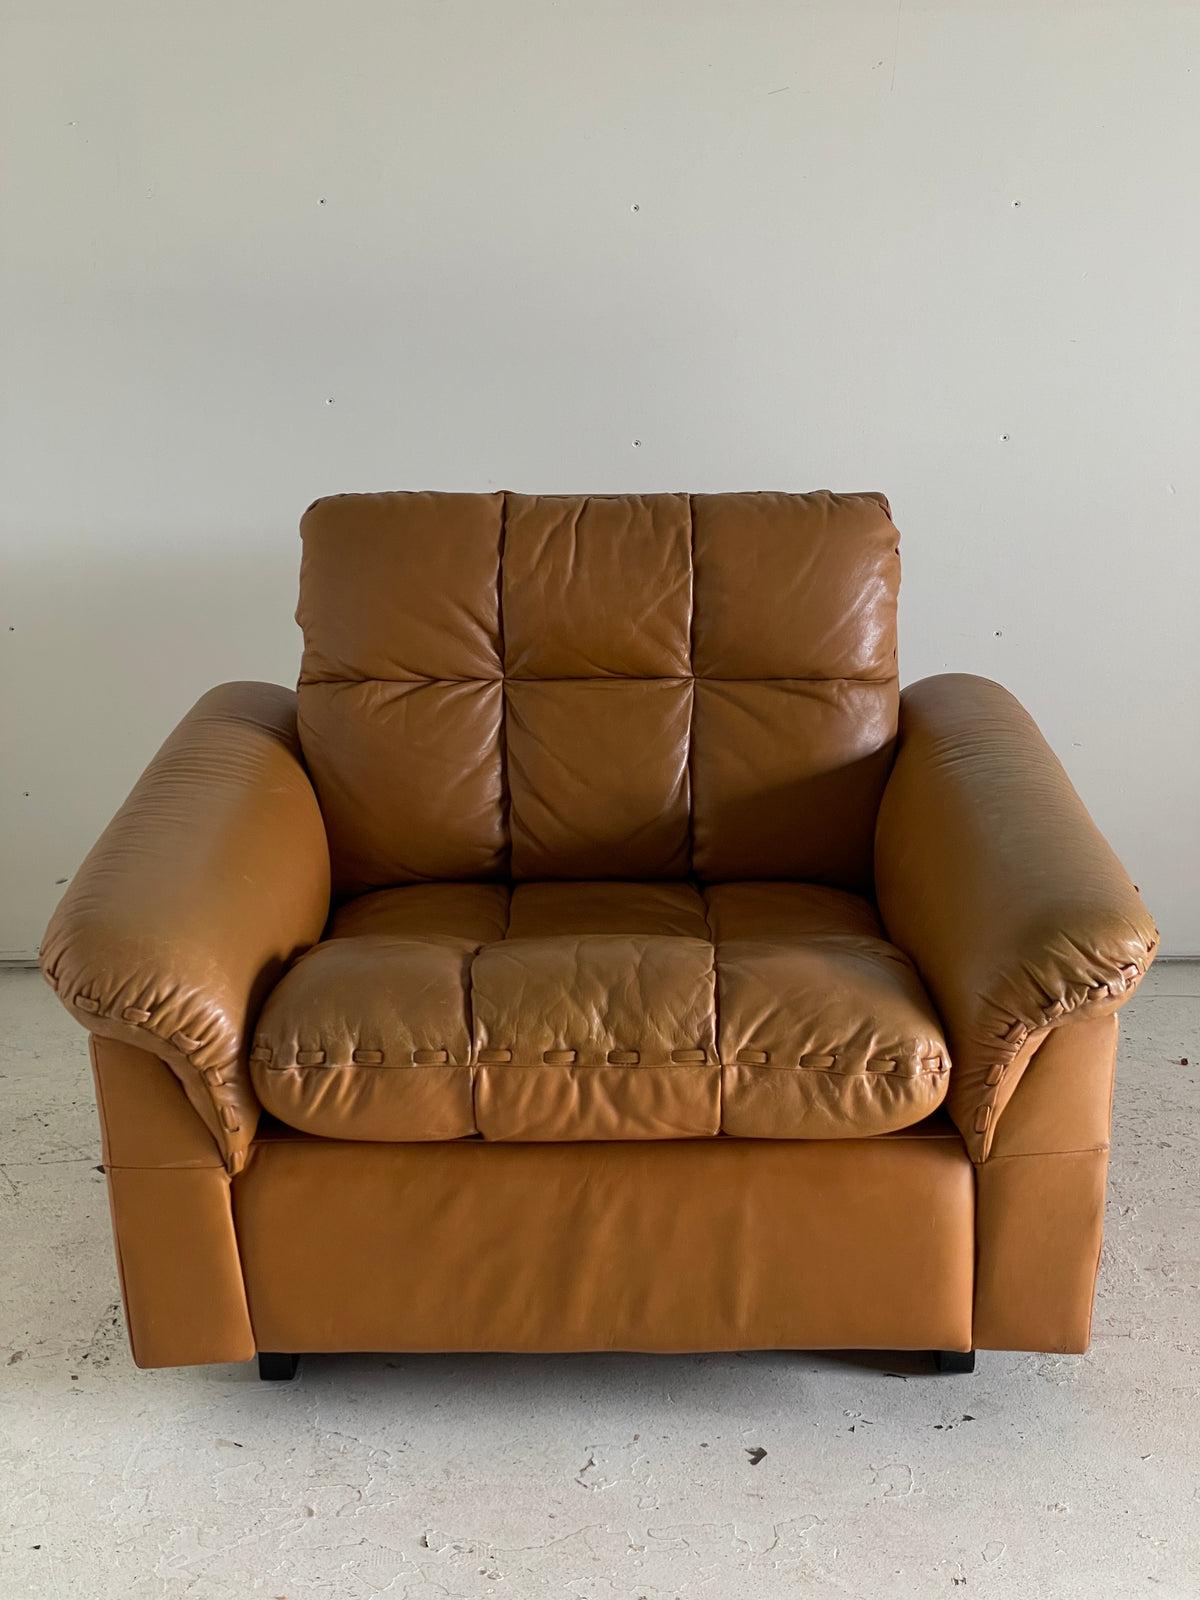 1970s leather lounge chair with incredible patina, woven detailing throughout on a floating wood base with its original tan and white leather checkered pillow. 

36”W x 34”D x 26”H x 17”SH

Pillow 16”L x 12”W x 3”thick.